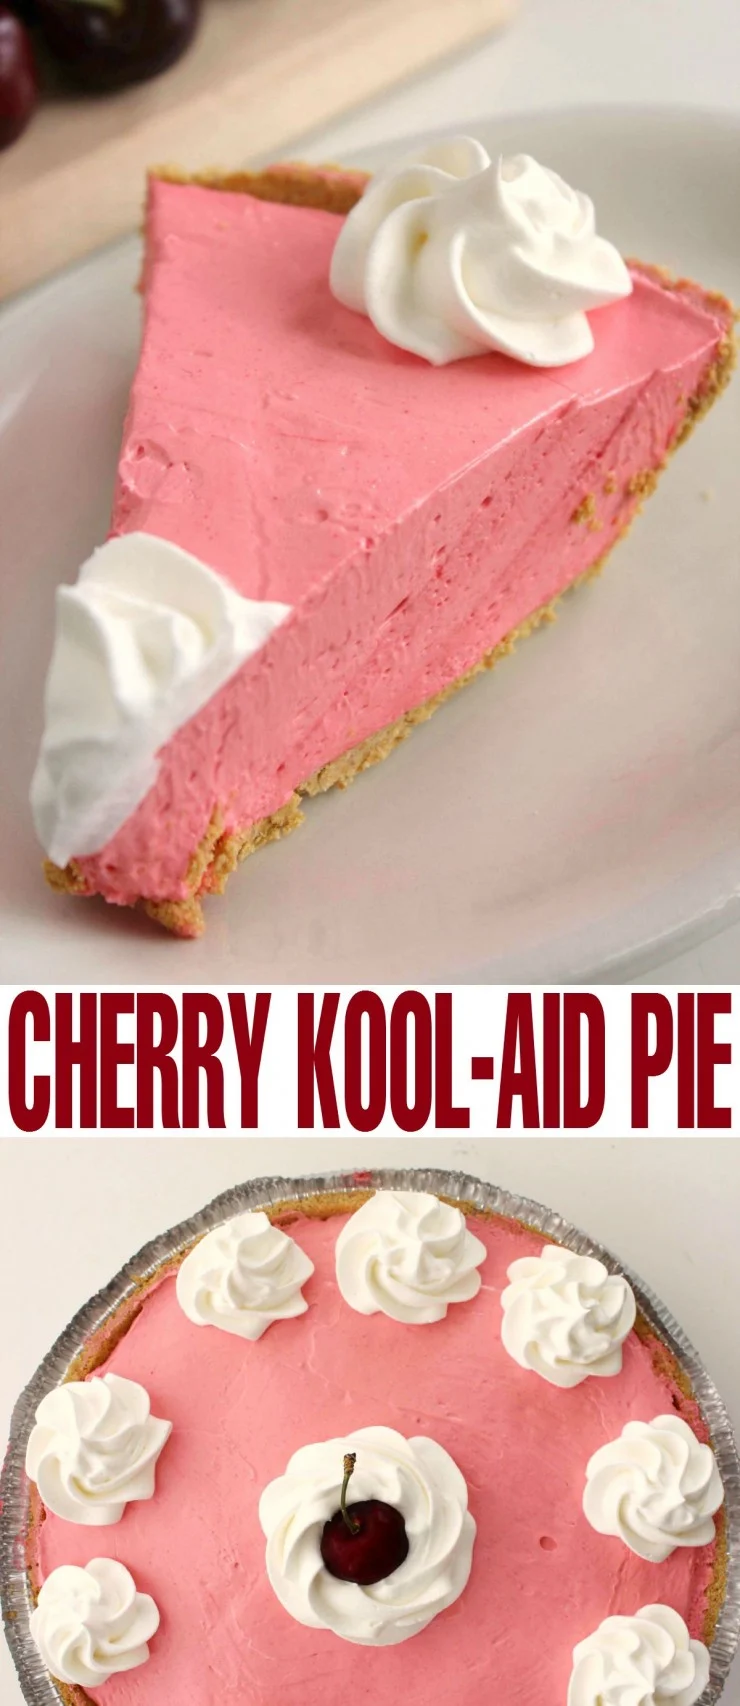 This Cherry Kool-Aid Pie is a fun dessert that is easy to make and tastes surprisingly good!